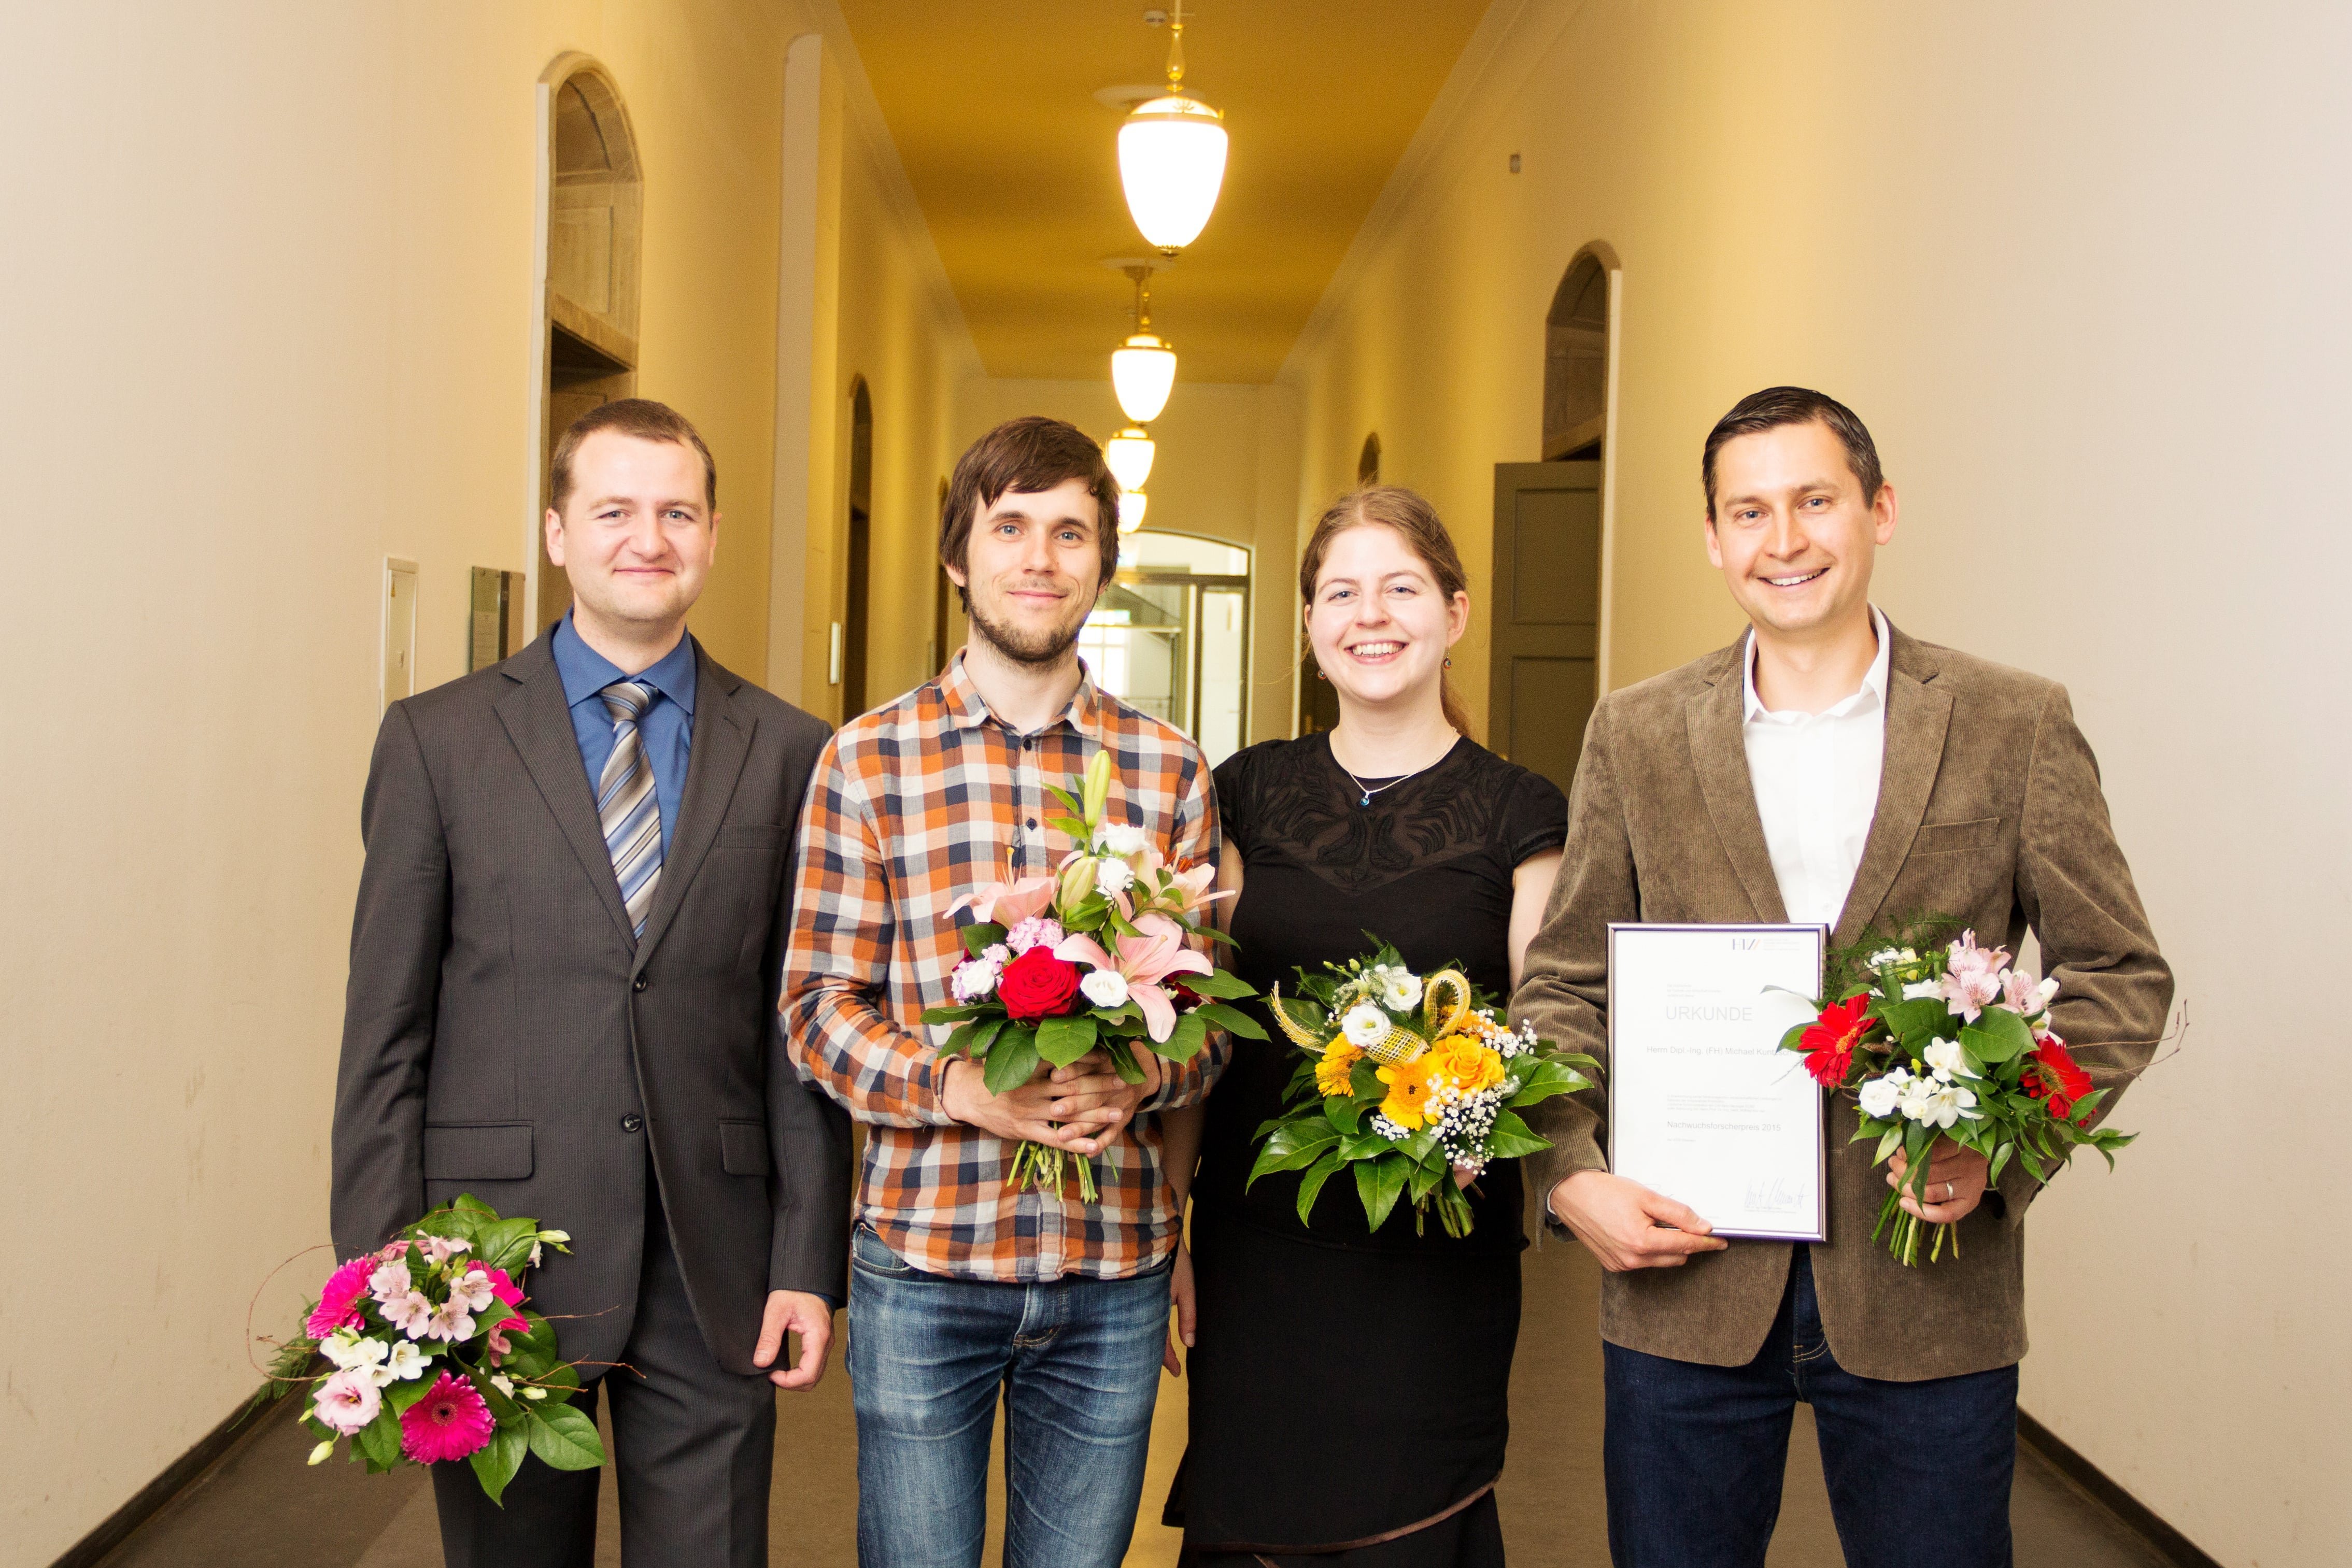 The finalists of the Young Scientists Award 2015: Award winner Michael Kuntzsch and the competitors Thomas Neumann, Loreen Pogrzeba, Wolfgang Wiebell